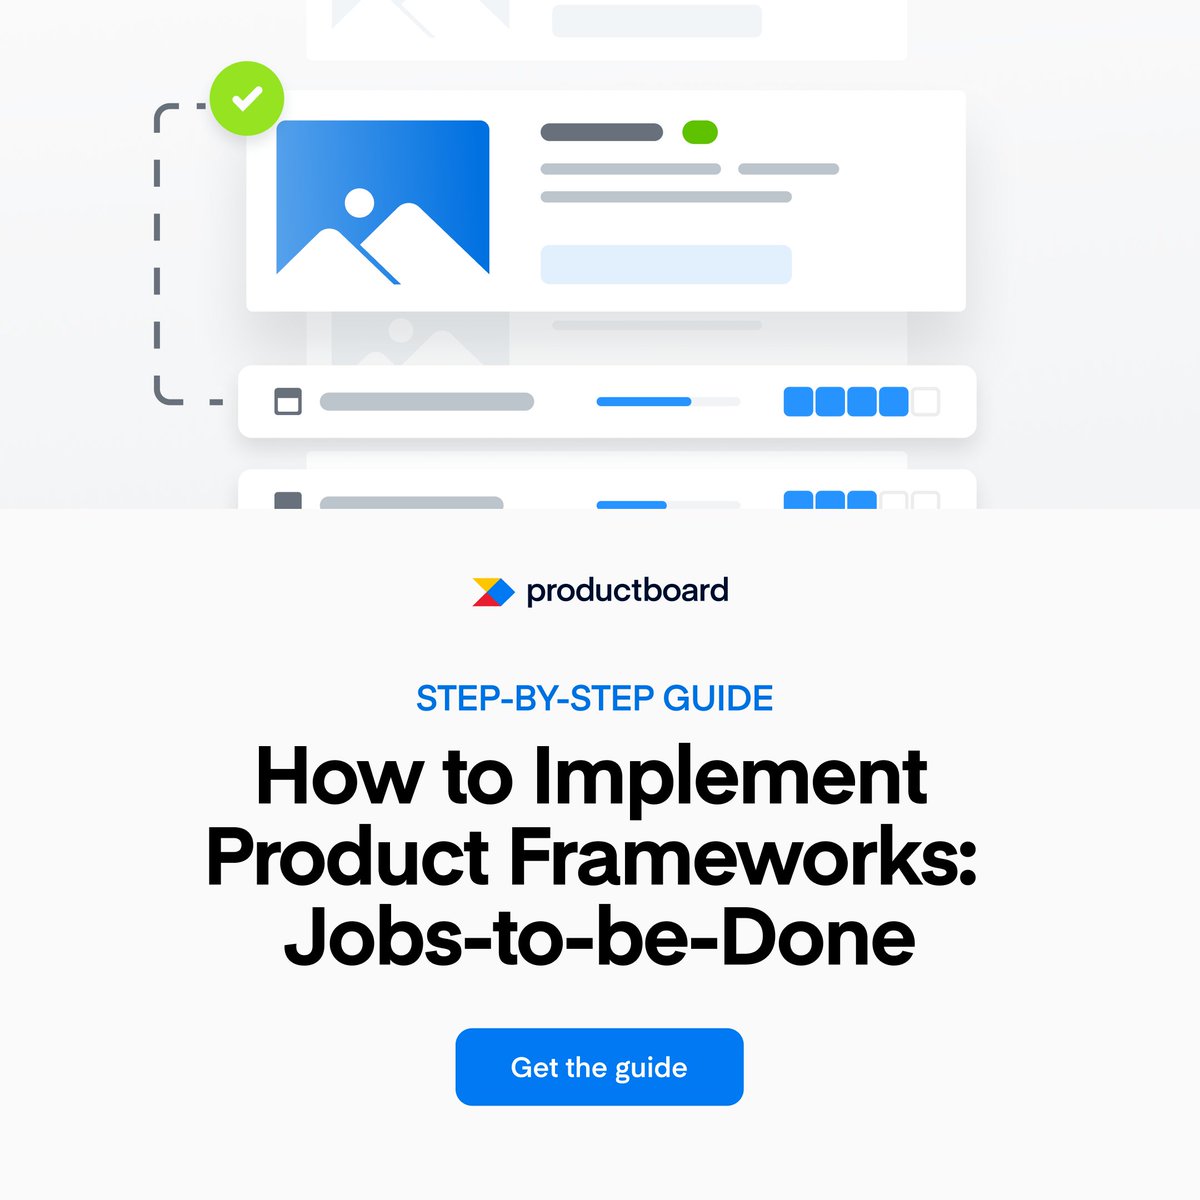 Streamline #productdevelopment with our Jobs-to-be-Done (JTBD) Framework guide: ✅ Integrate JTBD seamlessly ✅ Maintain consistent product strategy ✅ Solve real customer problems Get the guide 👉 bit.ly/3HdAPoB #ProductInnovation #CustomerFirst #ProductManagement